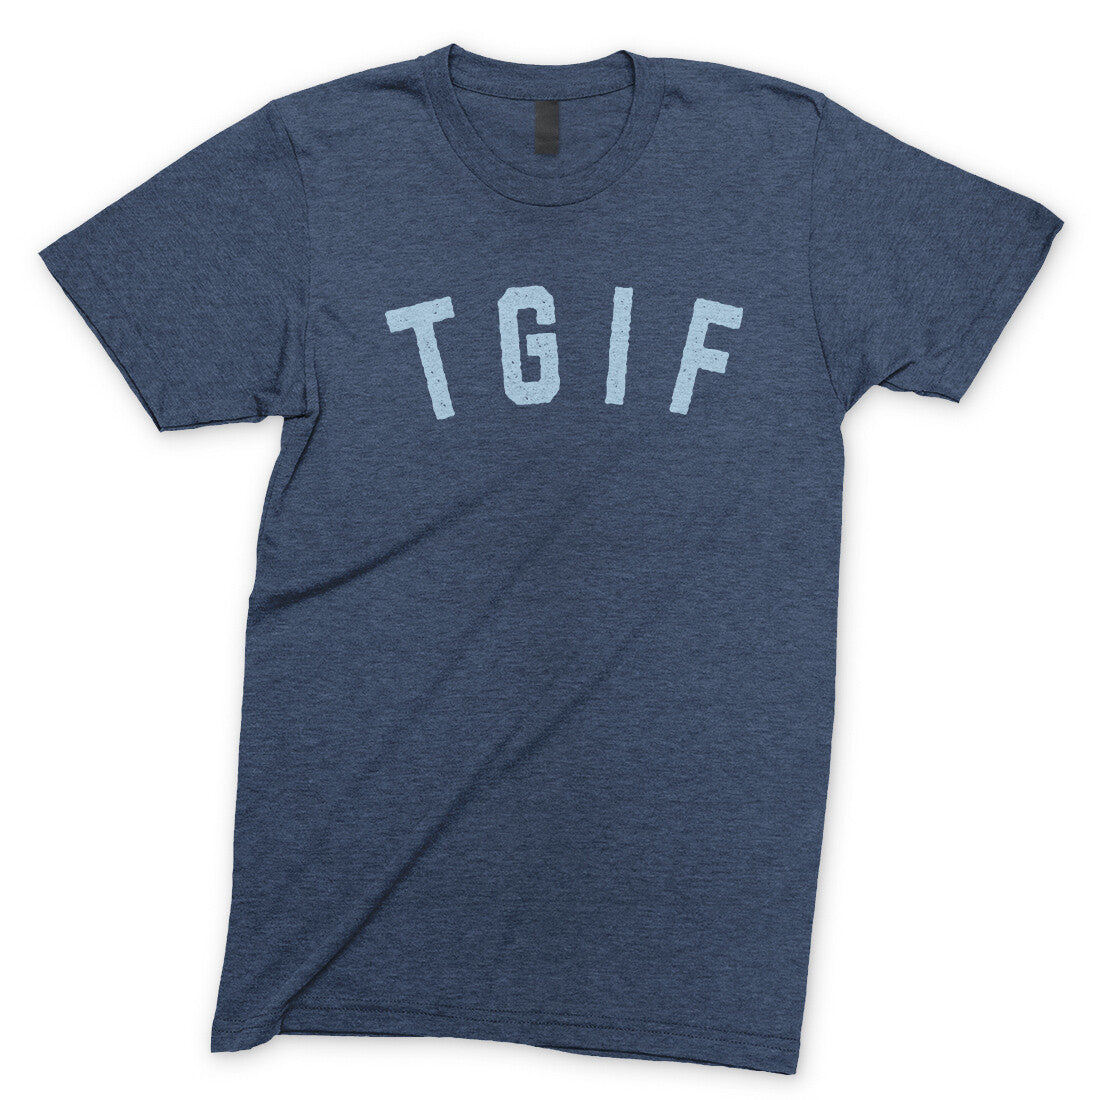 TGIF in Navy Heather Color